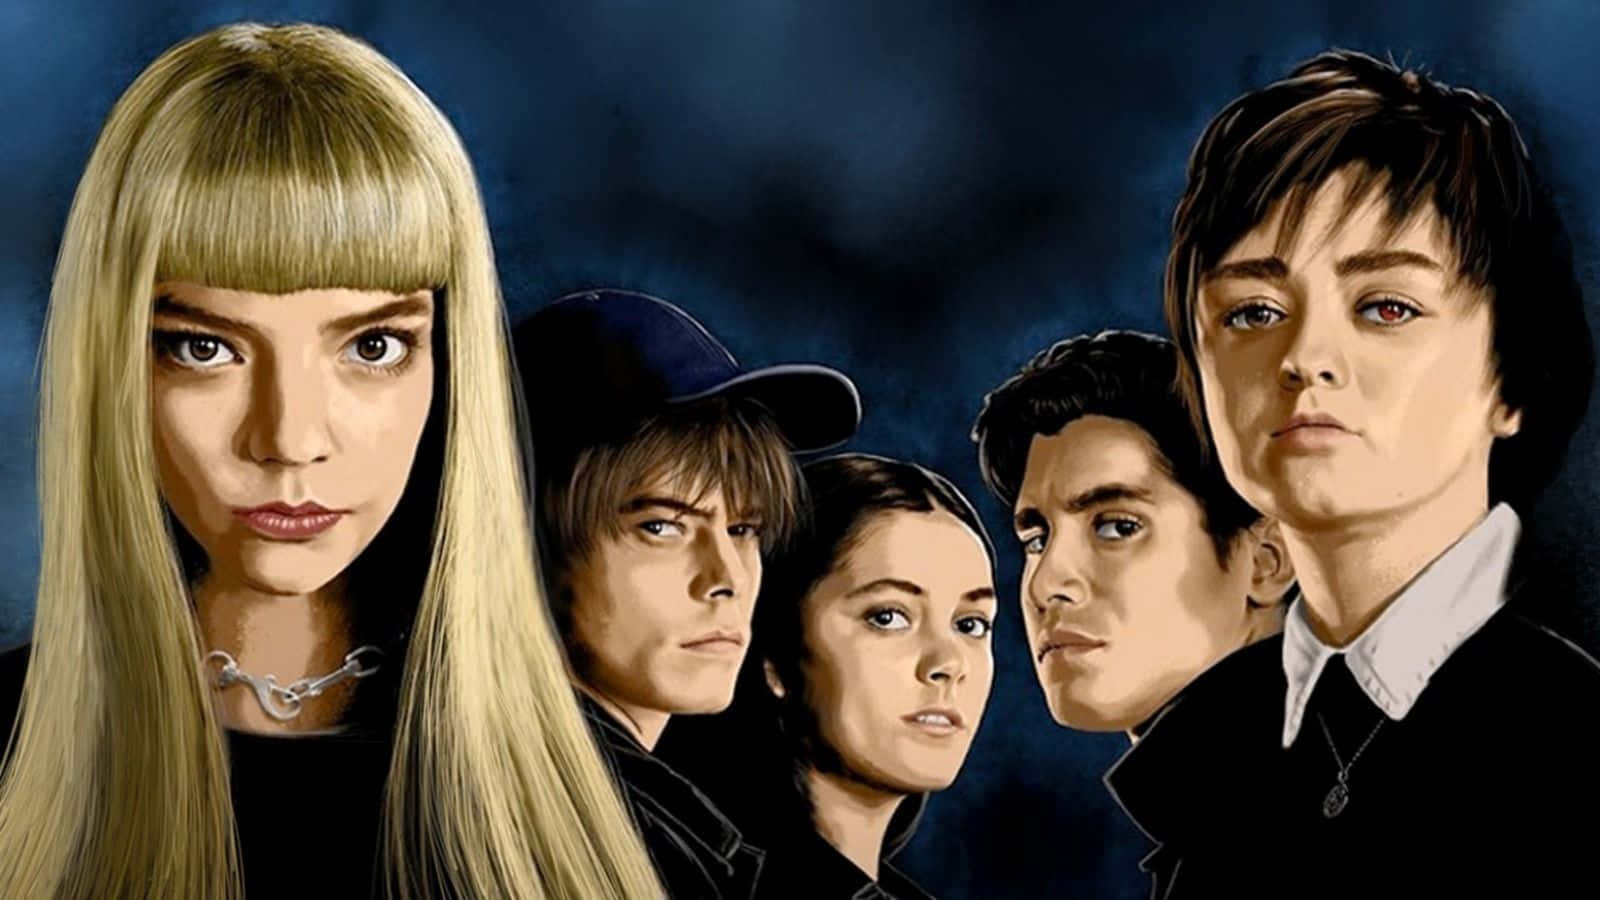 Download The New Mutants cast assemble in their superpowered forms  Wallpaper